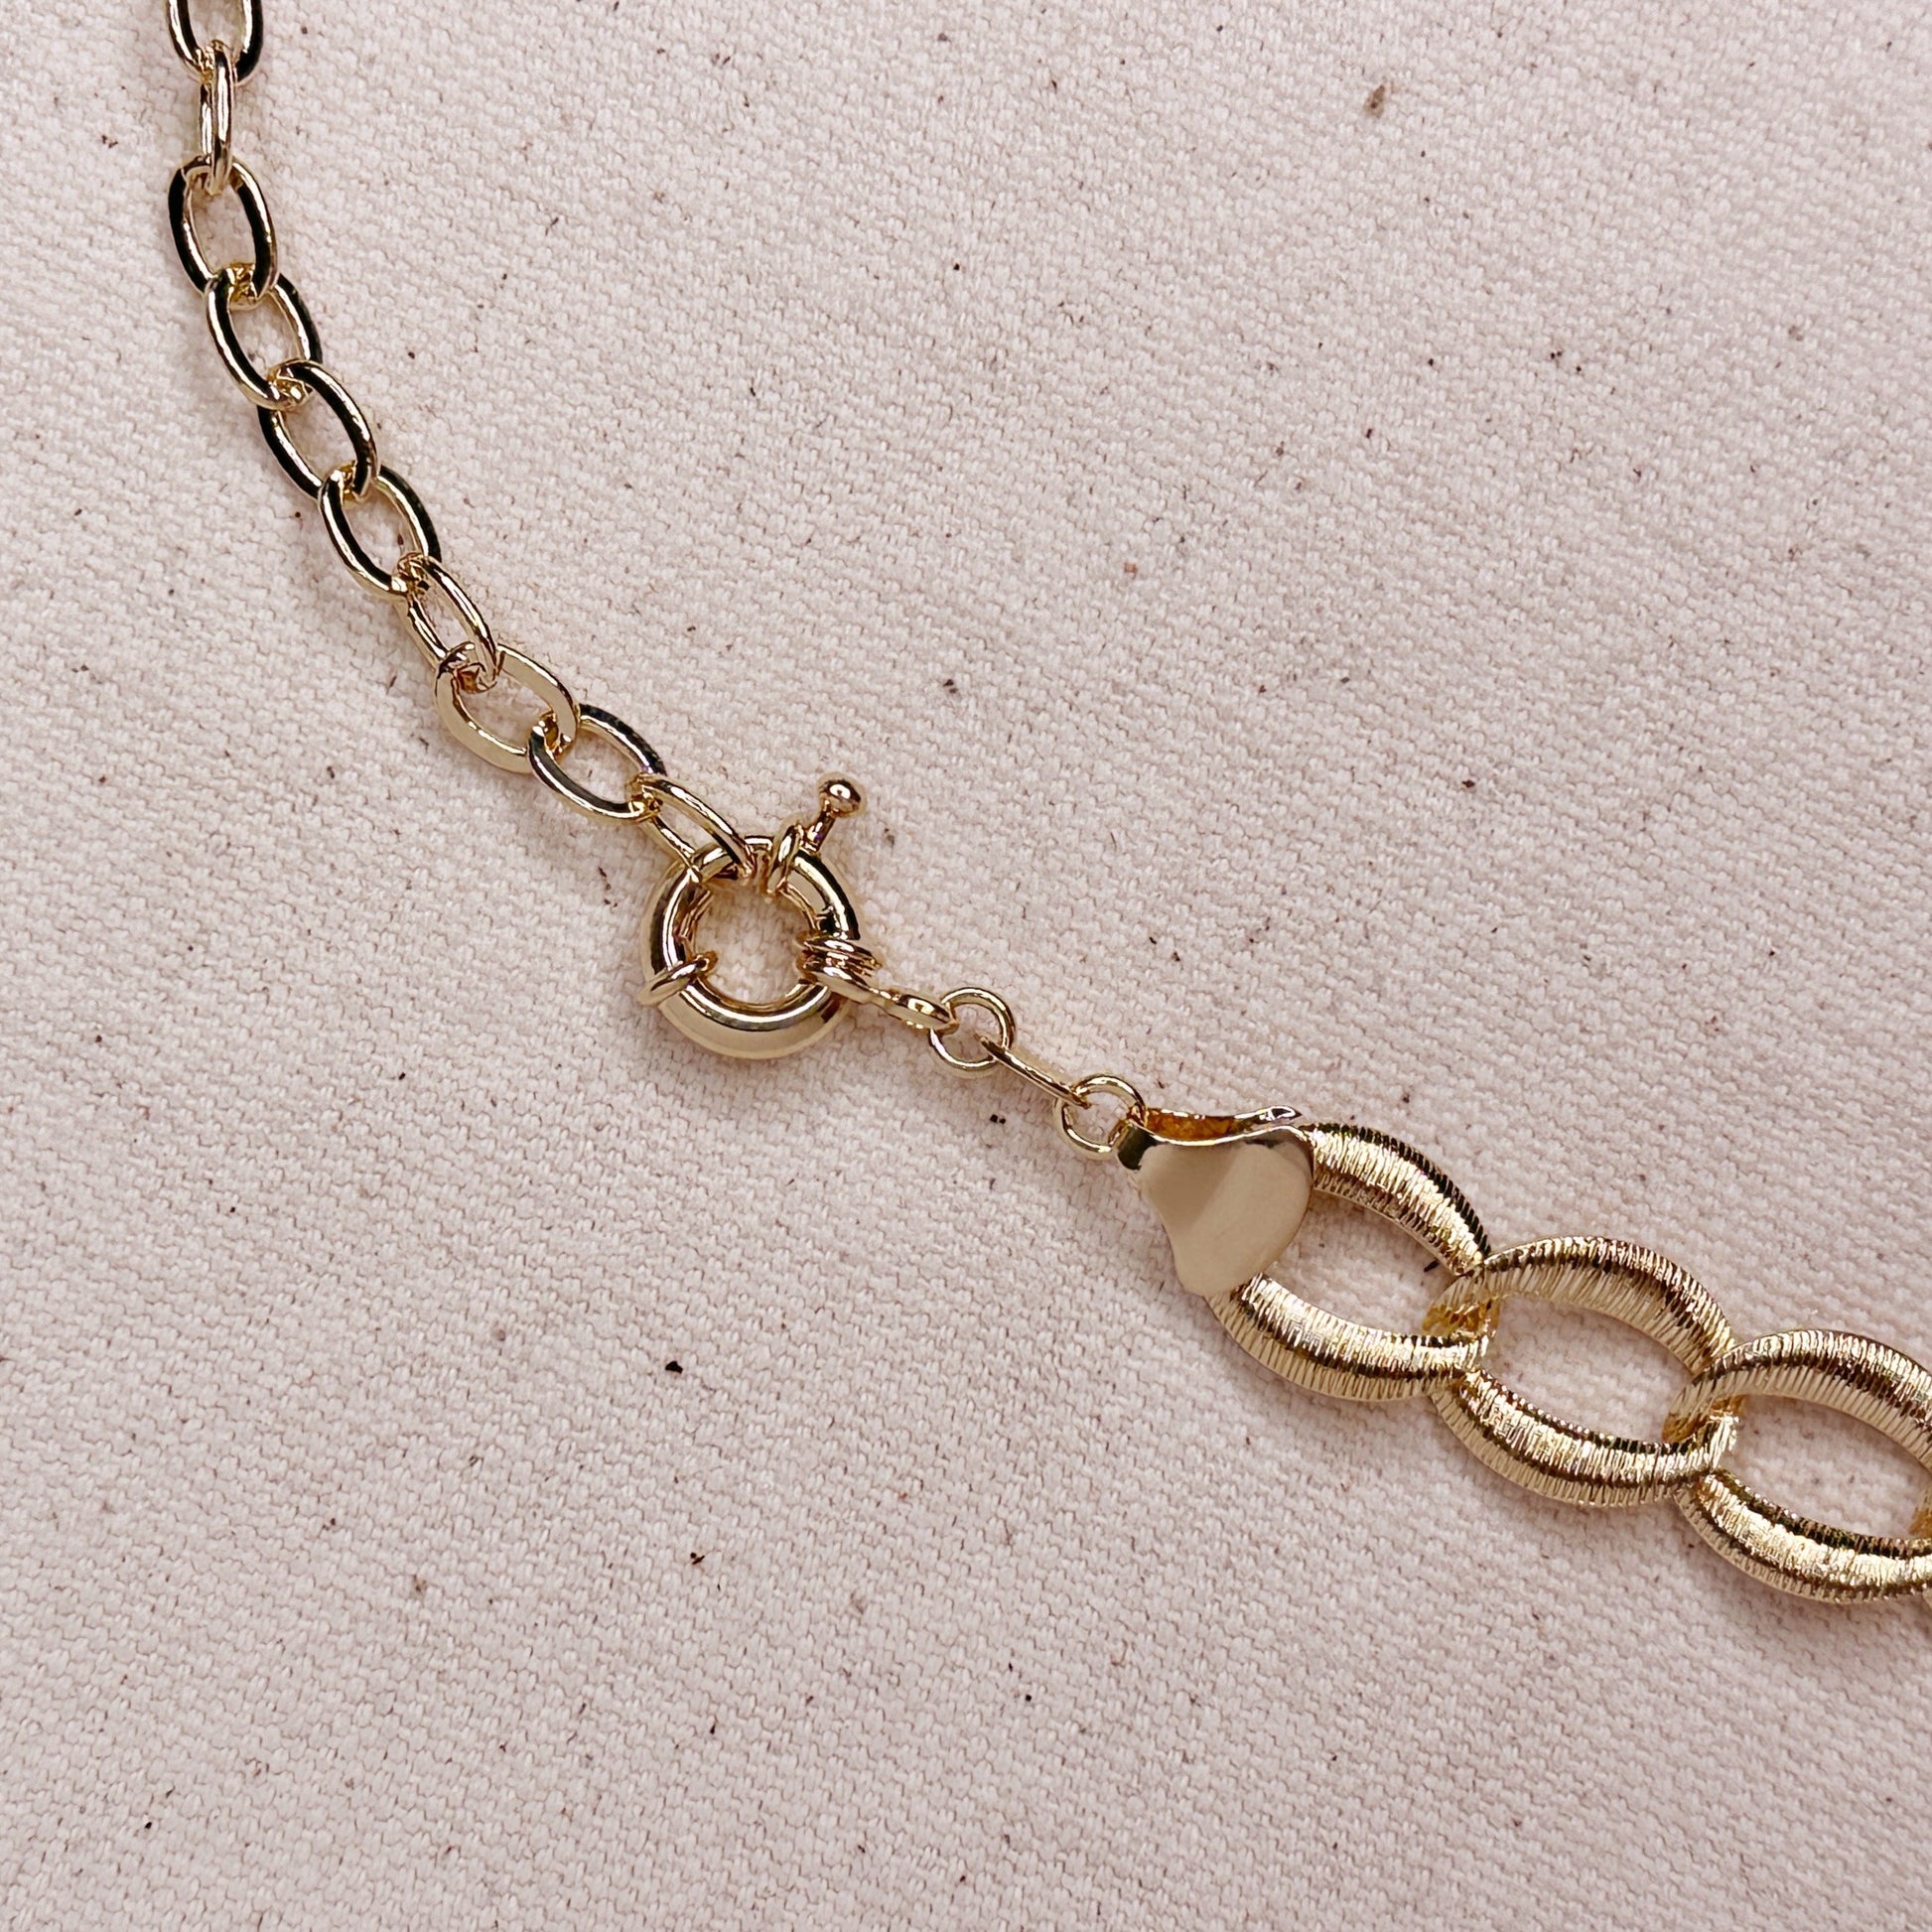 gold-filled bracelet featuring large spring clasp with curb extension